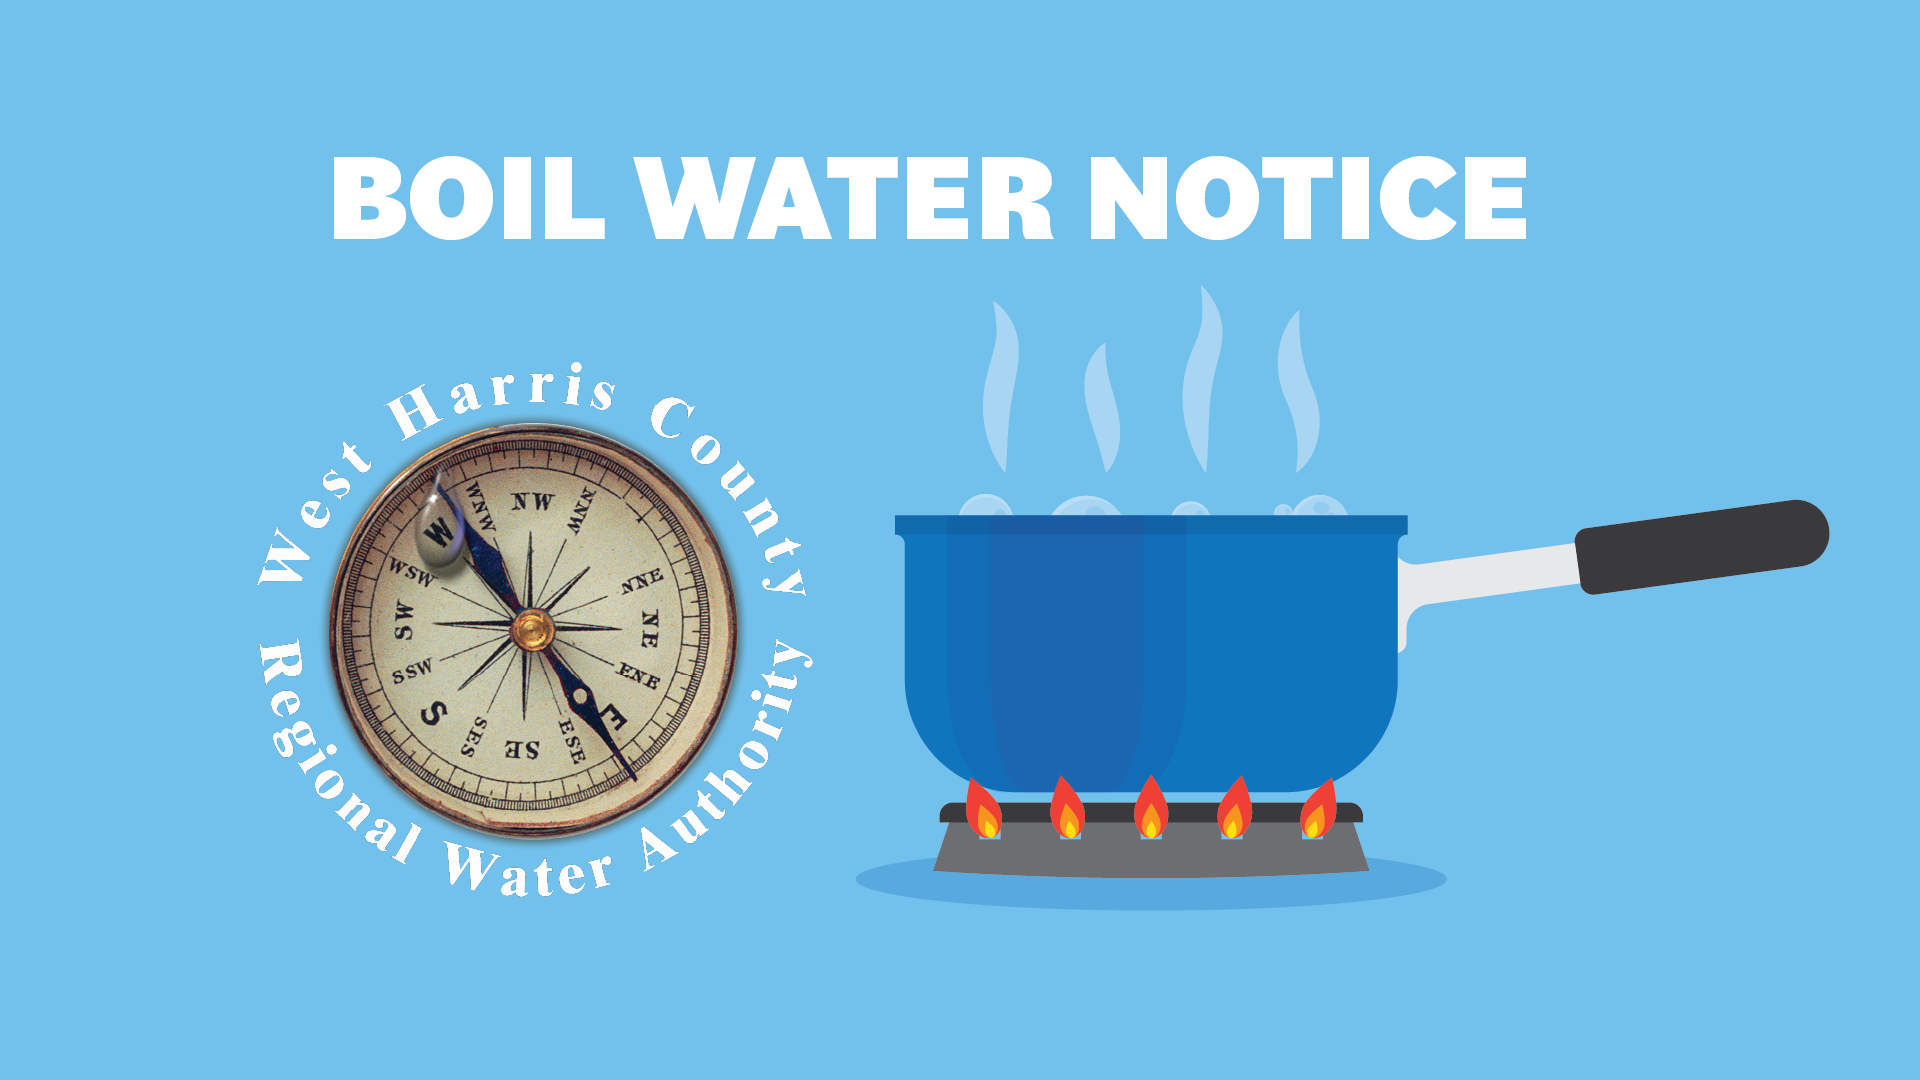 WHCRWA ISSUES BOIL WATER NOTICE TO UTILITY DISTRICT CUSTOMERS